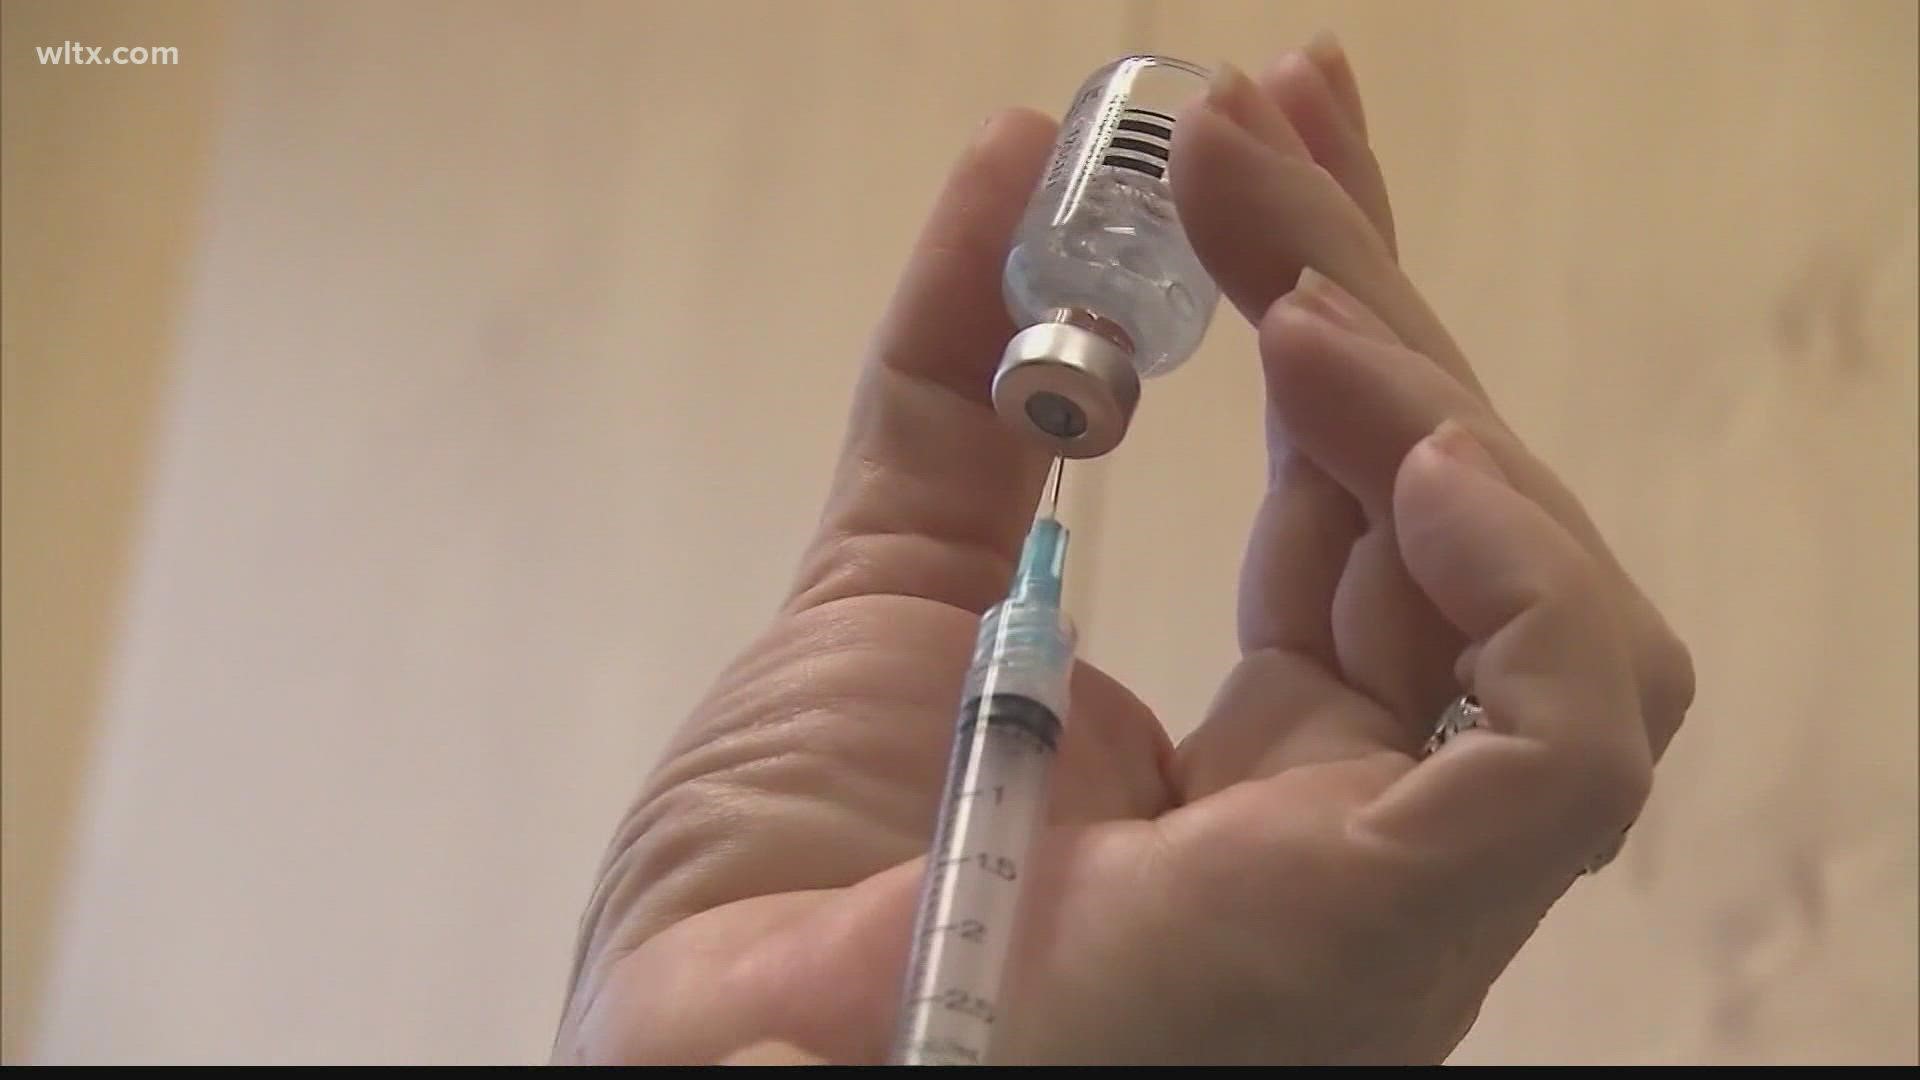 Officials say we could soon be battling flu season on top of COVID-19. So, when is best to get both vaccines and is it safe to do so at the same time?